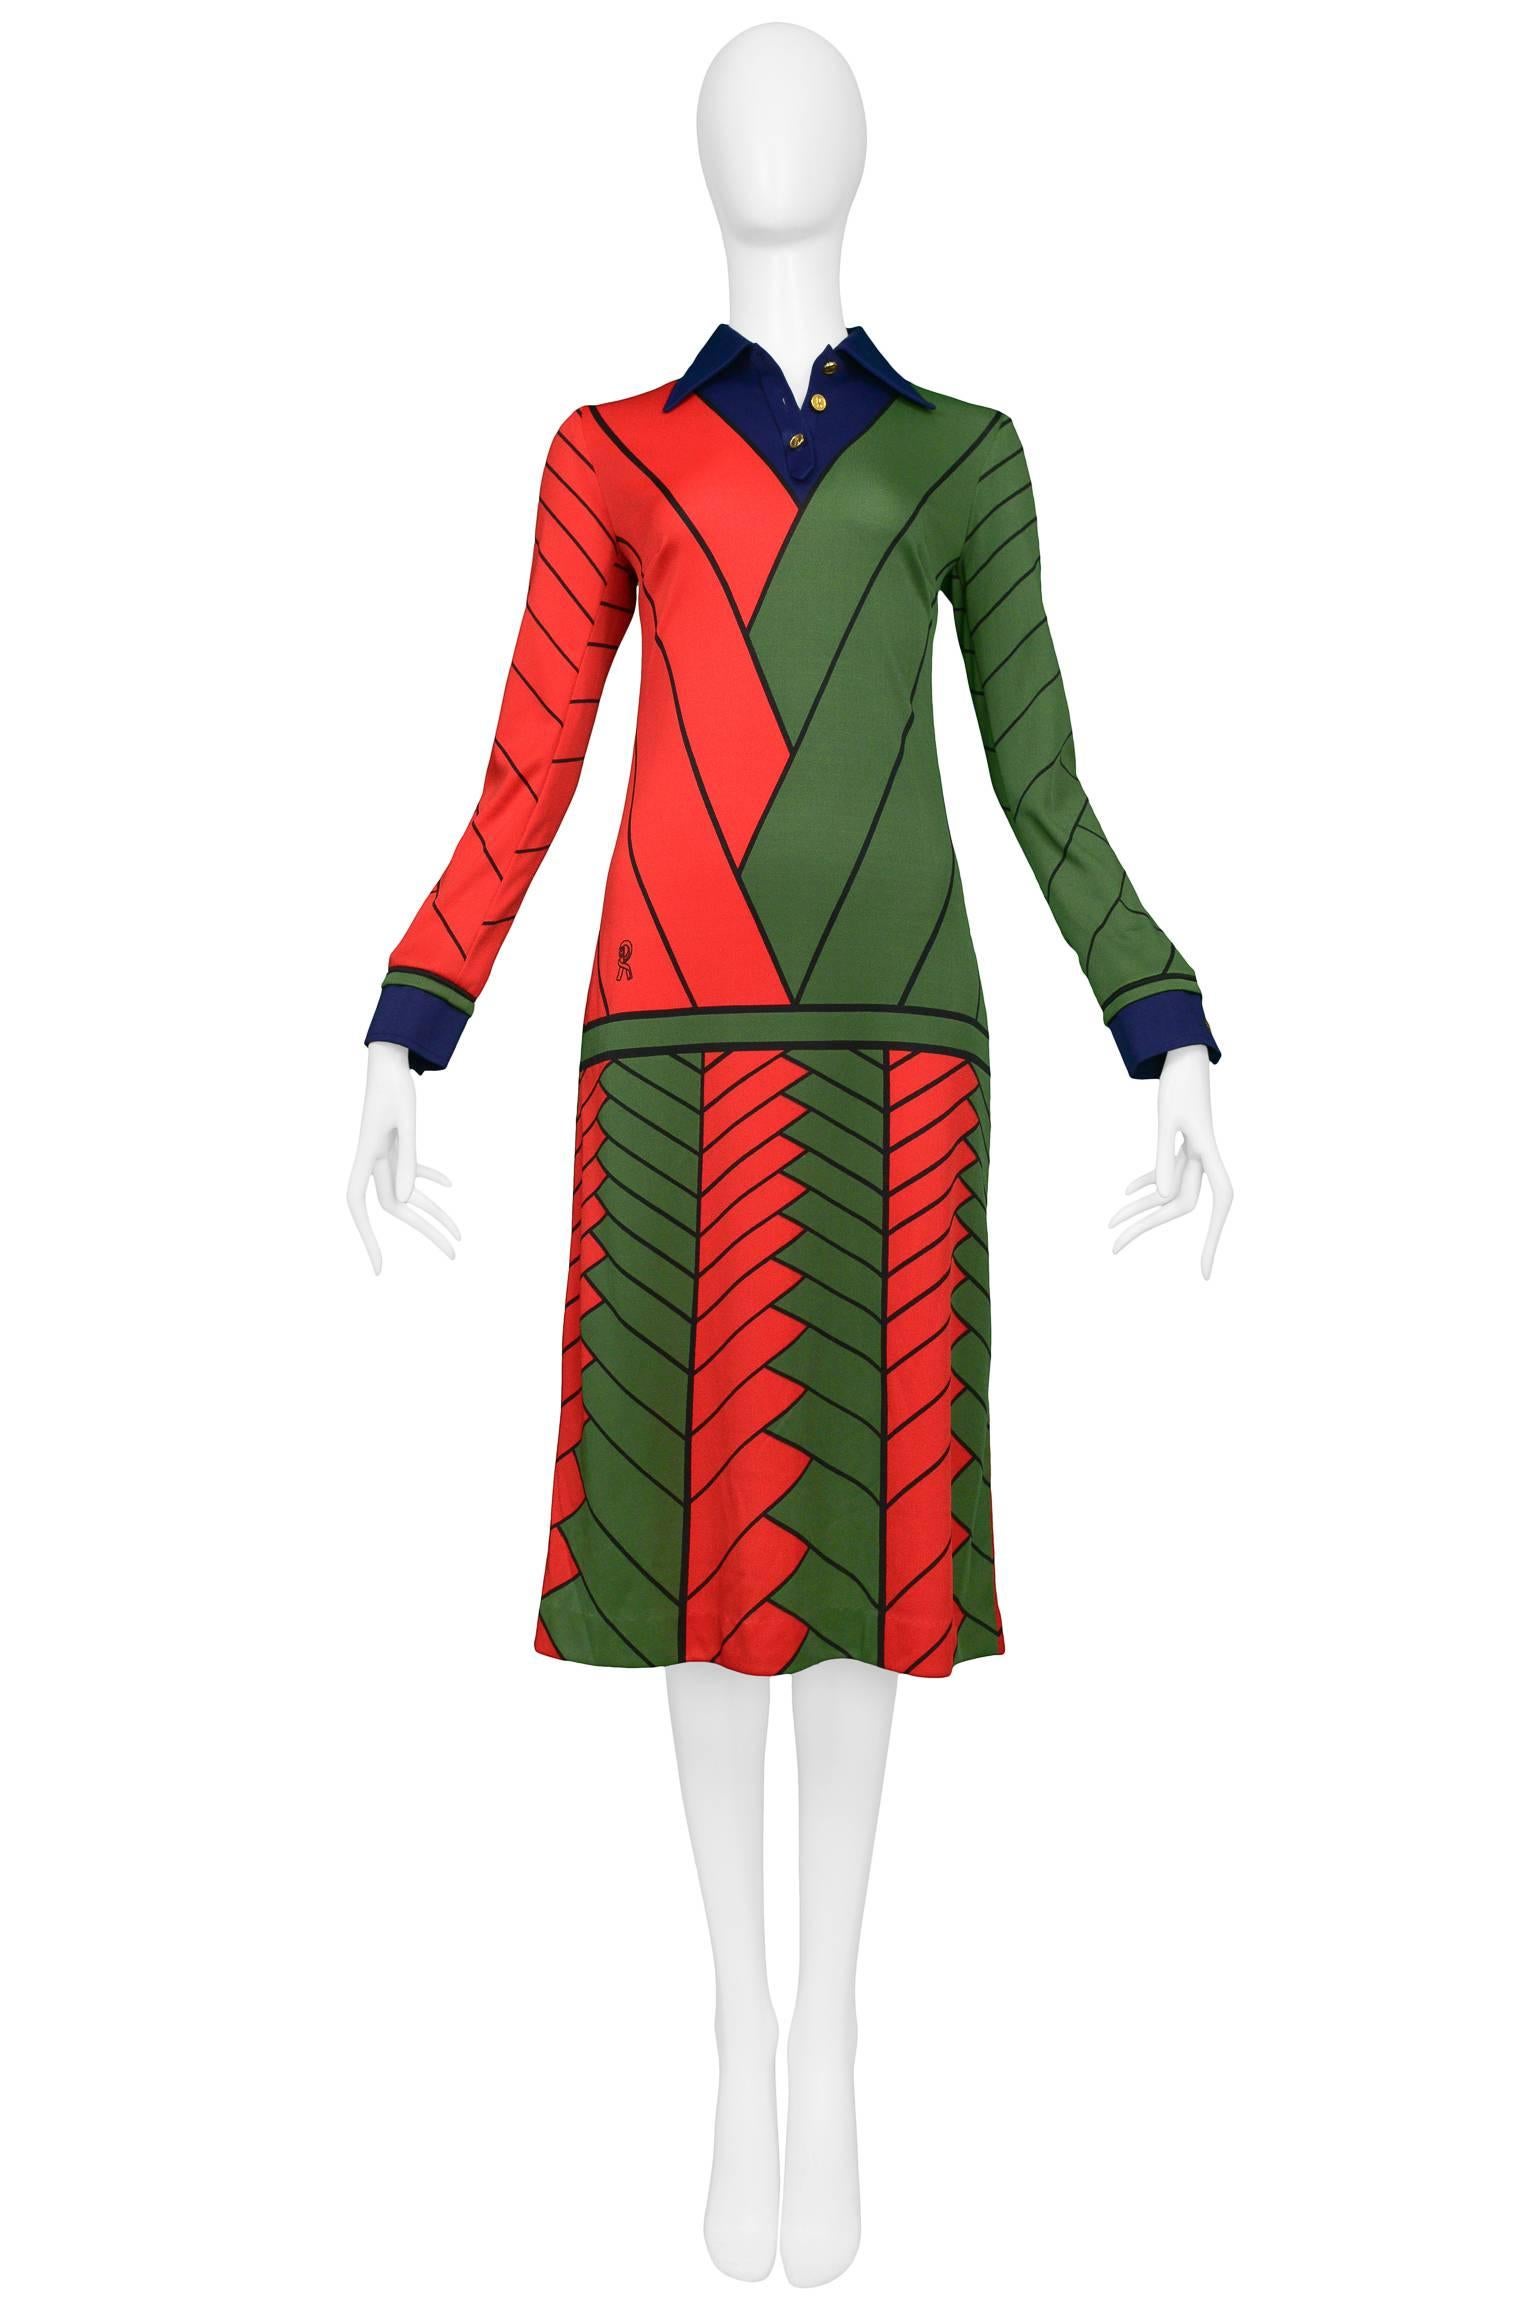 Vintage red, green and navy Roberta di Camerino trompe l'oeil jersey day dress with sleeves. Dress features signature Roberta print and gold tone 